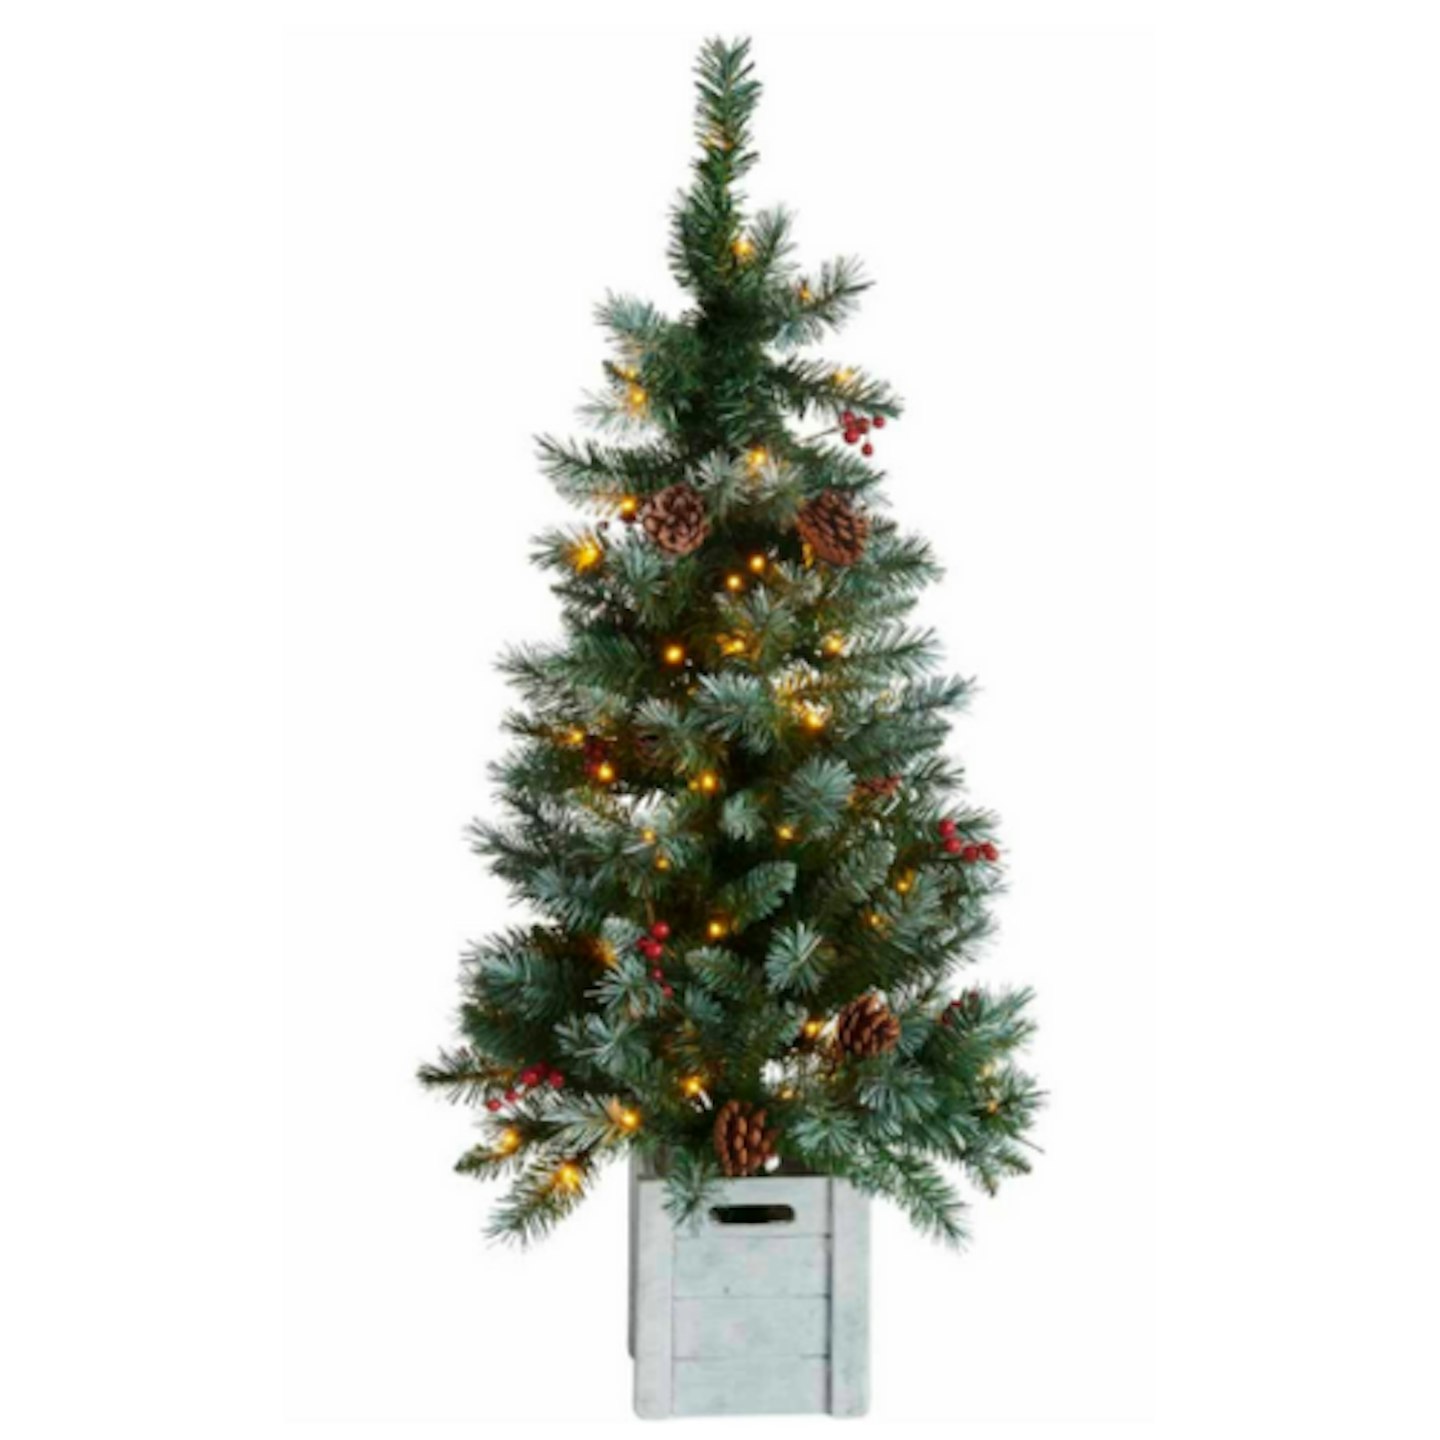 Wilko 4ft Pre Lit Cone and Berries Christmas Tree in Square Planter